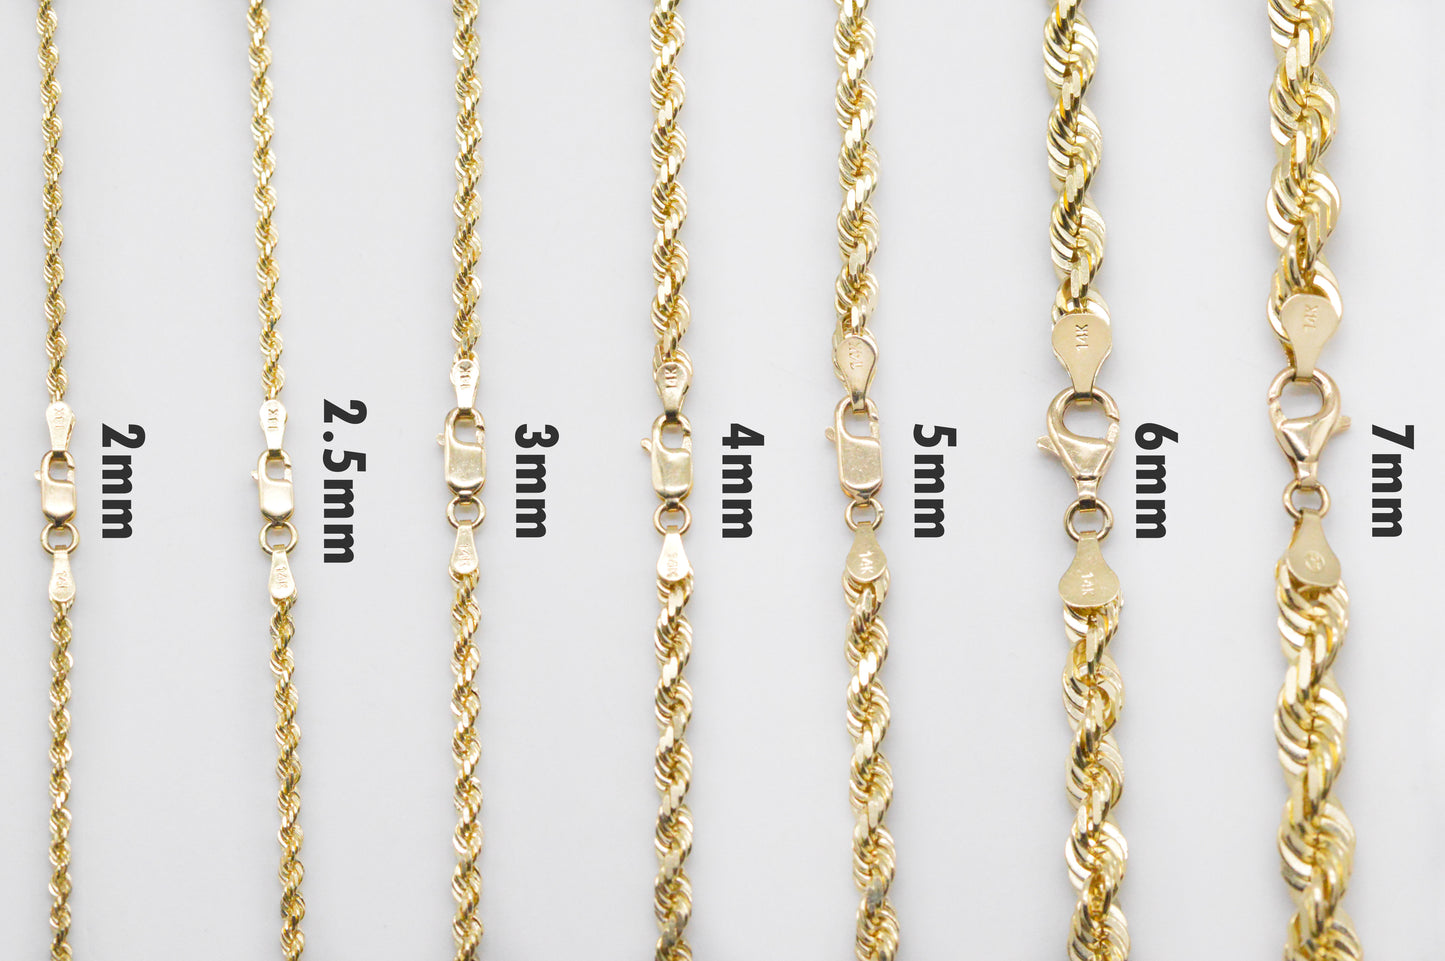 2.5mm Solid Gold Diamond Cut Rope Necklace Solid Gold Rope Chains